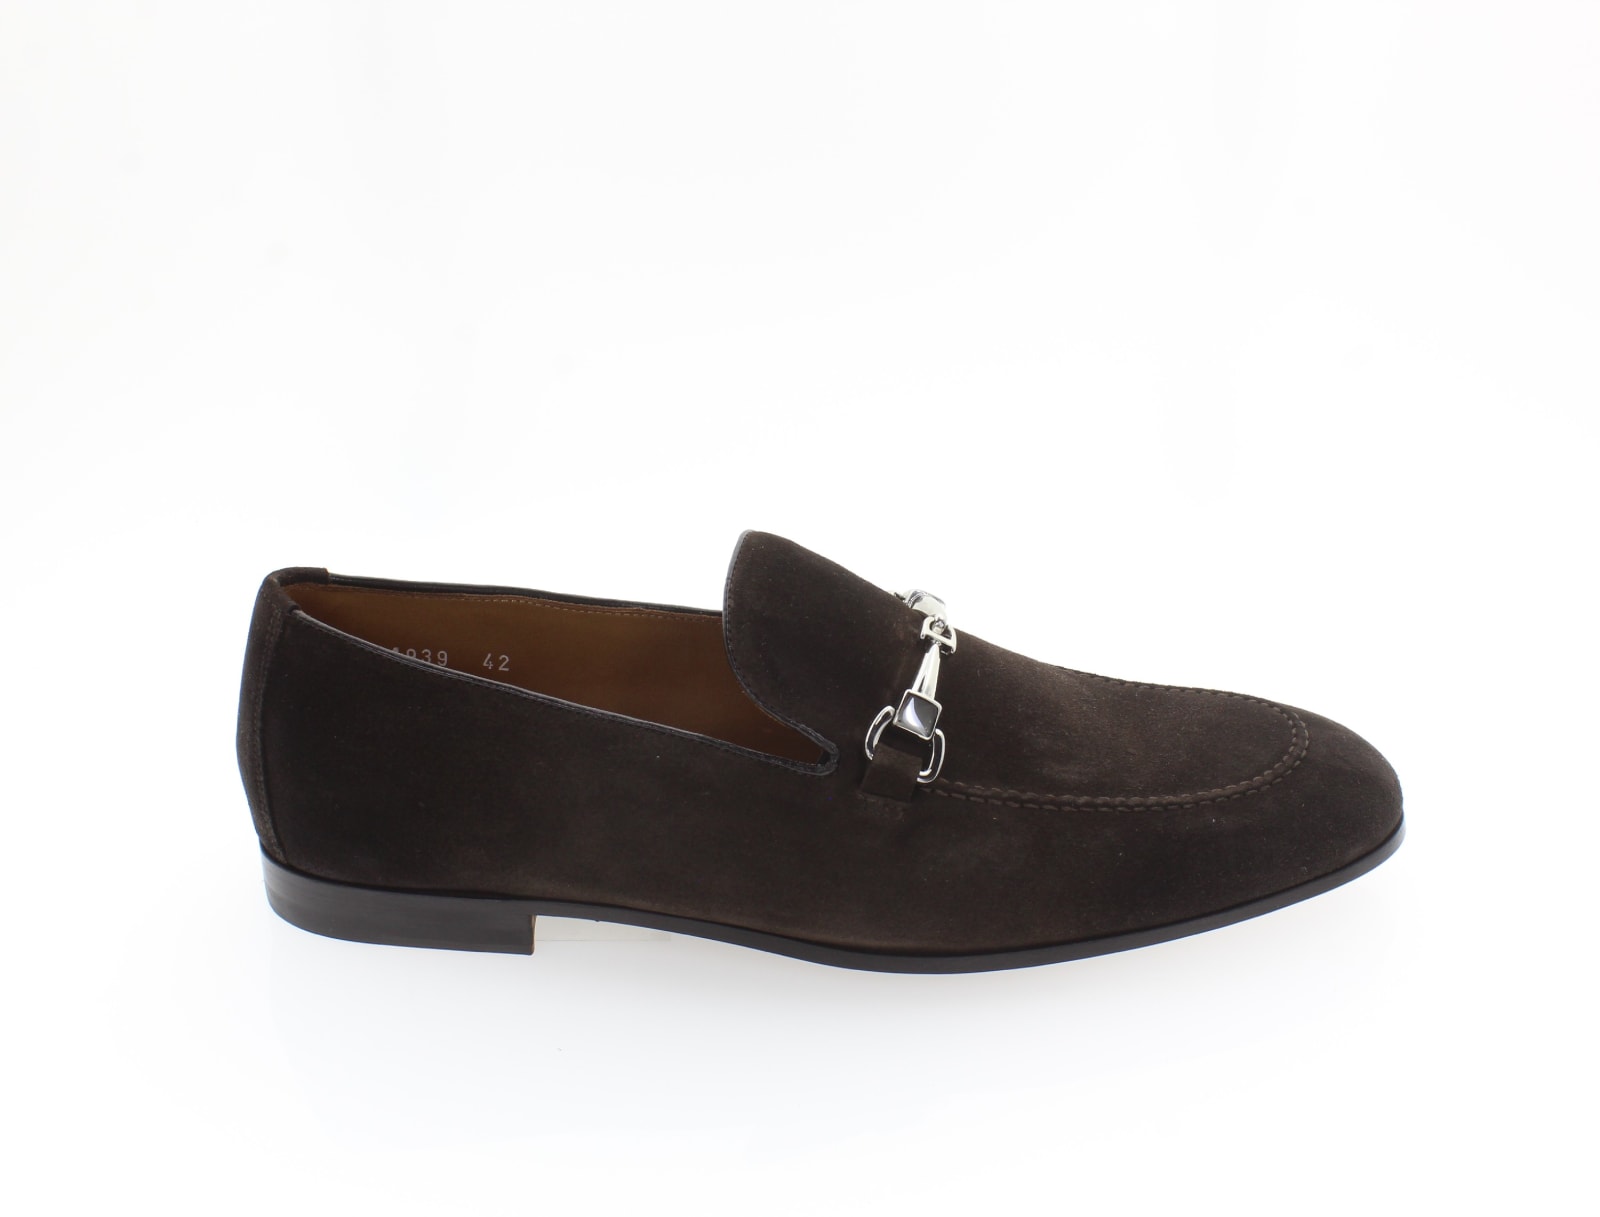 Doucals Doucals Suede Leather Loafers